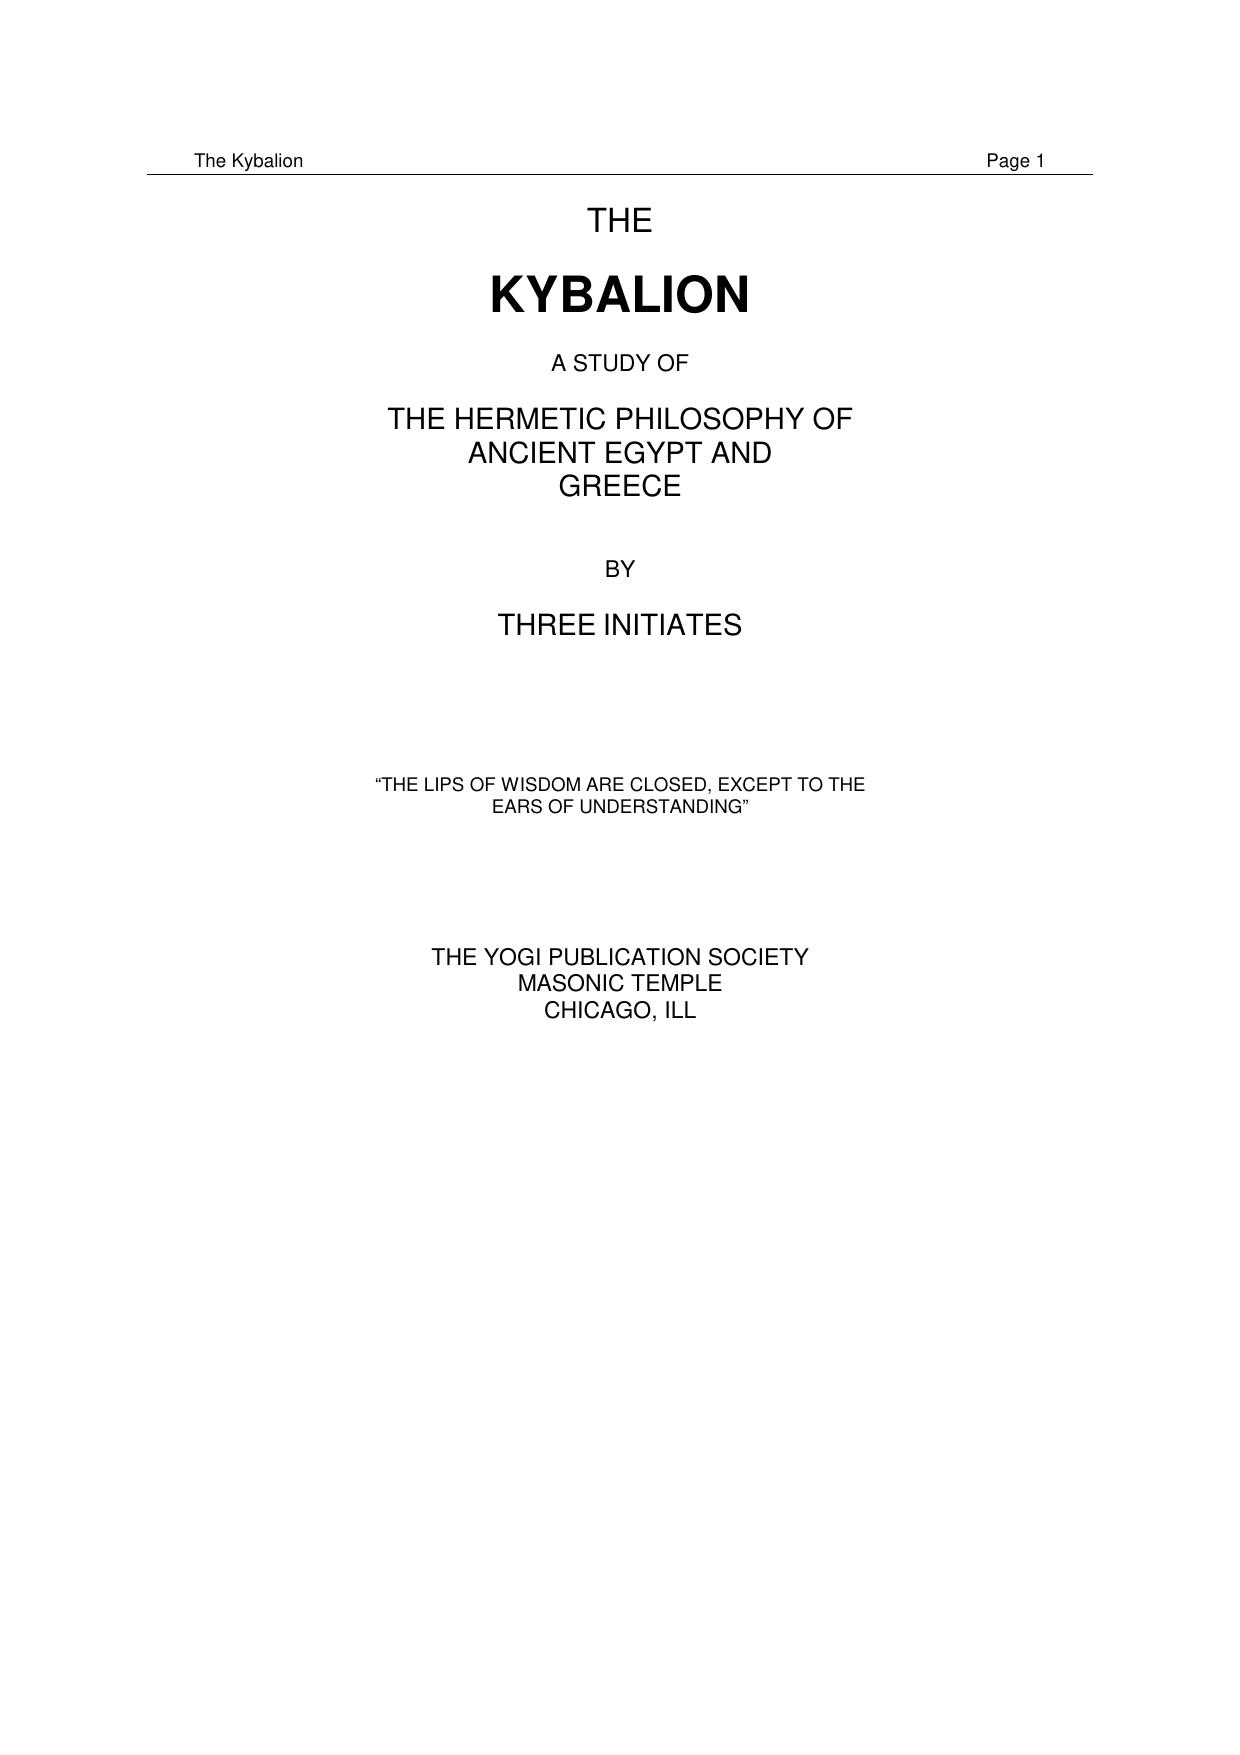 The Kybalion - A Study of the Hermetic Philosophy of Ancient Egypt and Greece by Three Initiates